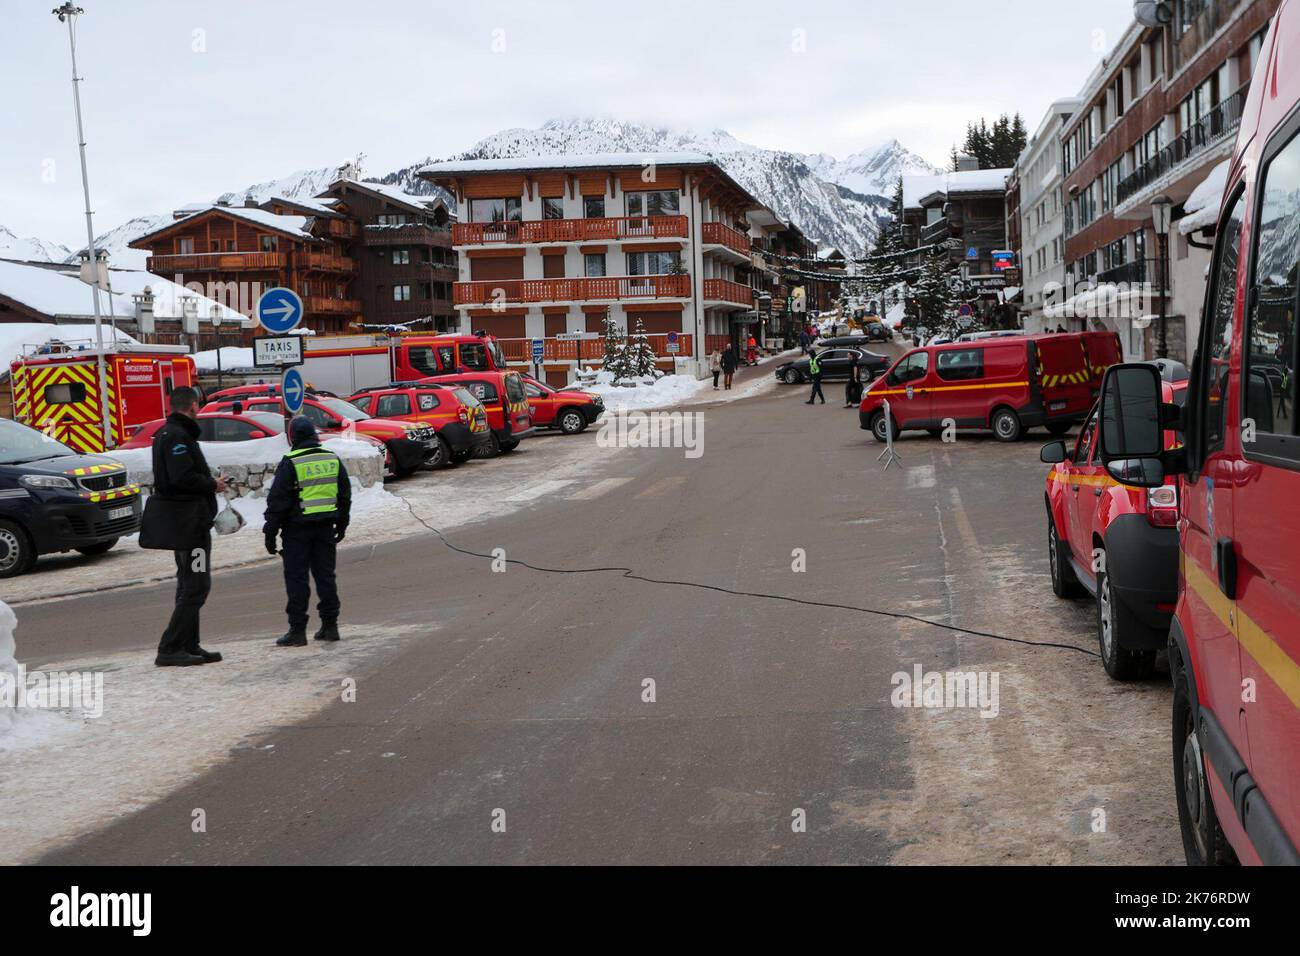 Chalet workers jump from windows as two people are killed and more than a dozen injured after massive fire breaks out at Courchevel ski resort popular with celebrities and royals in the French Alps Stock Photo